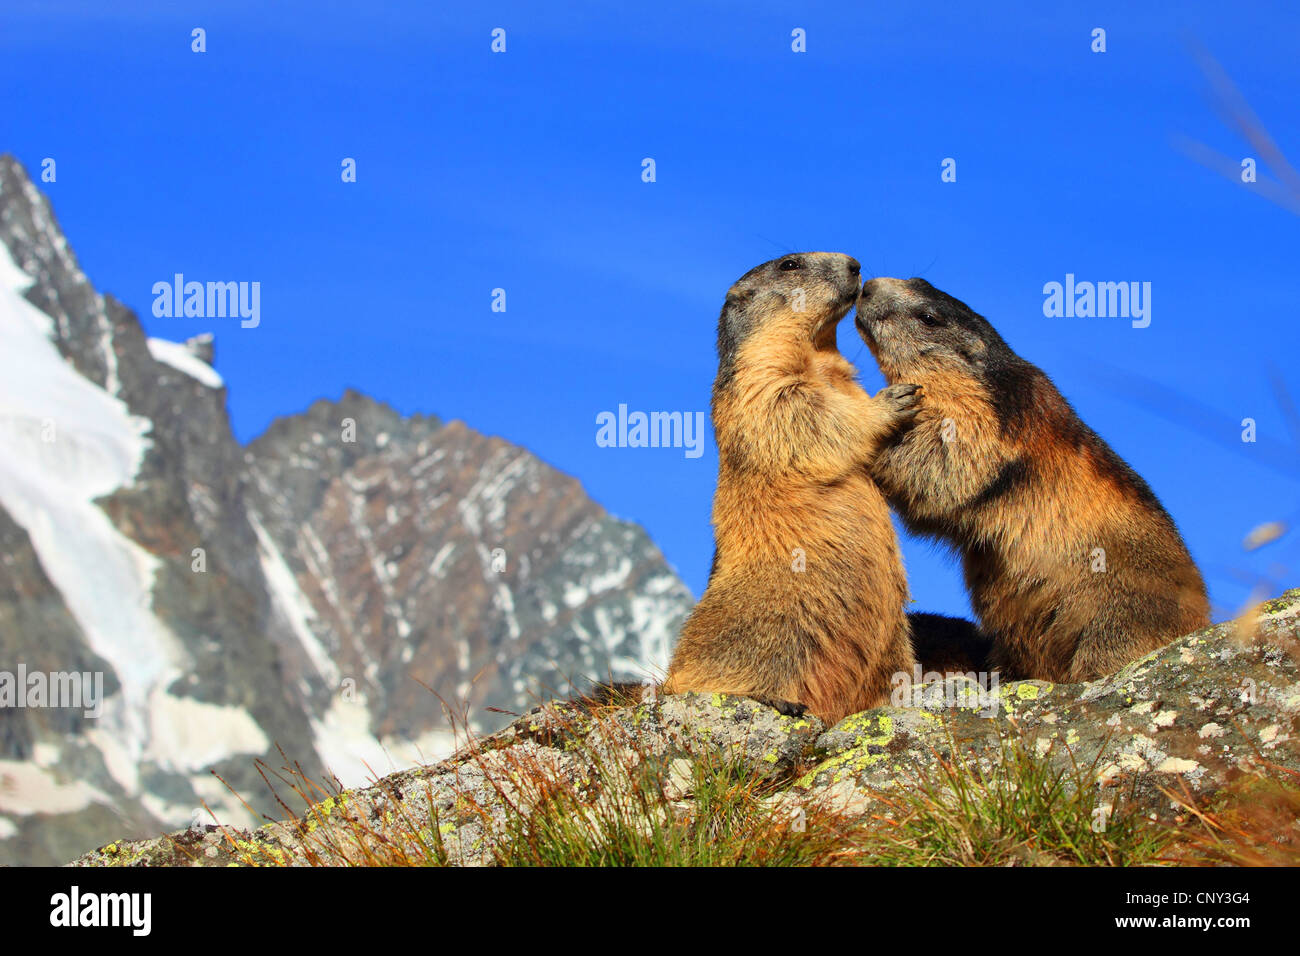 alpine marmot (Marmota marmota), two animals standing errected vis-a-vis in front of a pictoresque mountain sight, Austria, Hohe Tauern National Park, Grossglockner Stock Photo